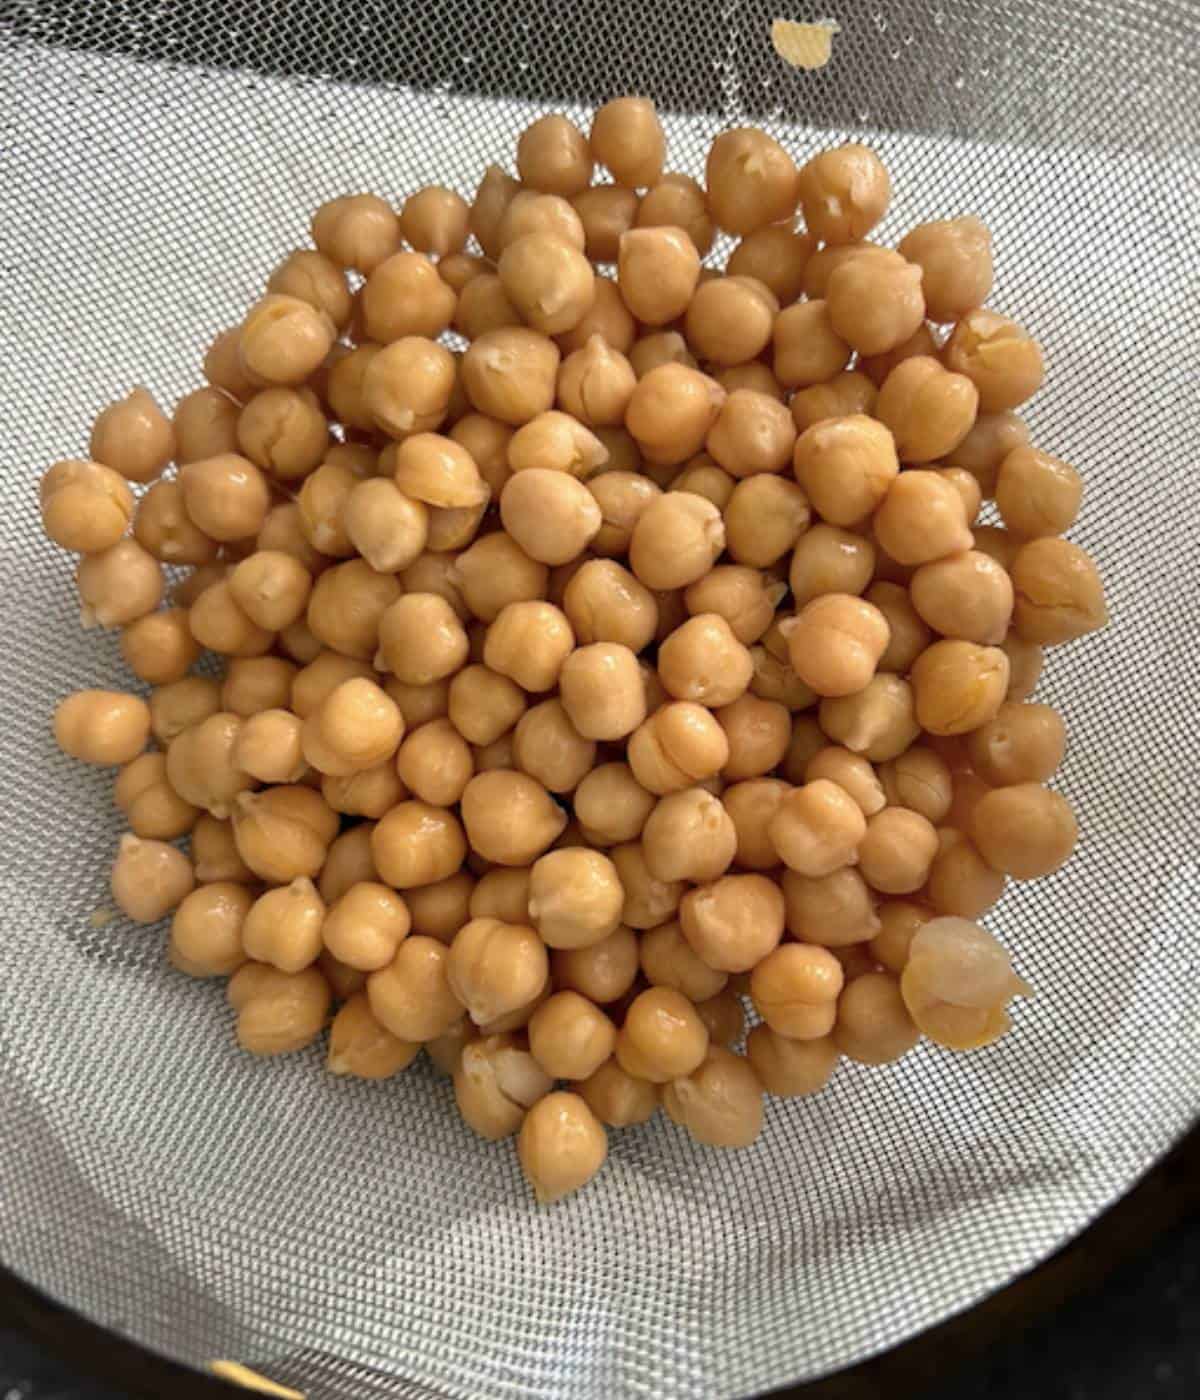 Drained and dried chickpeas in colander.